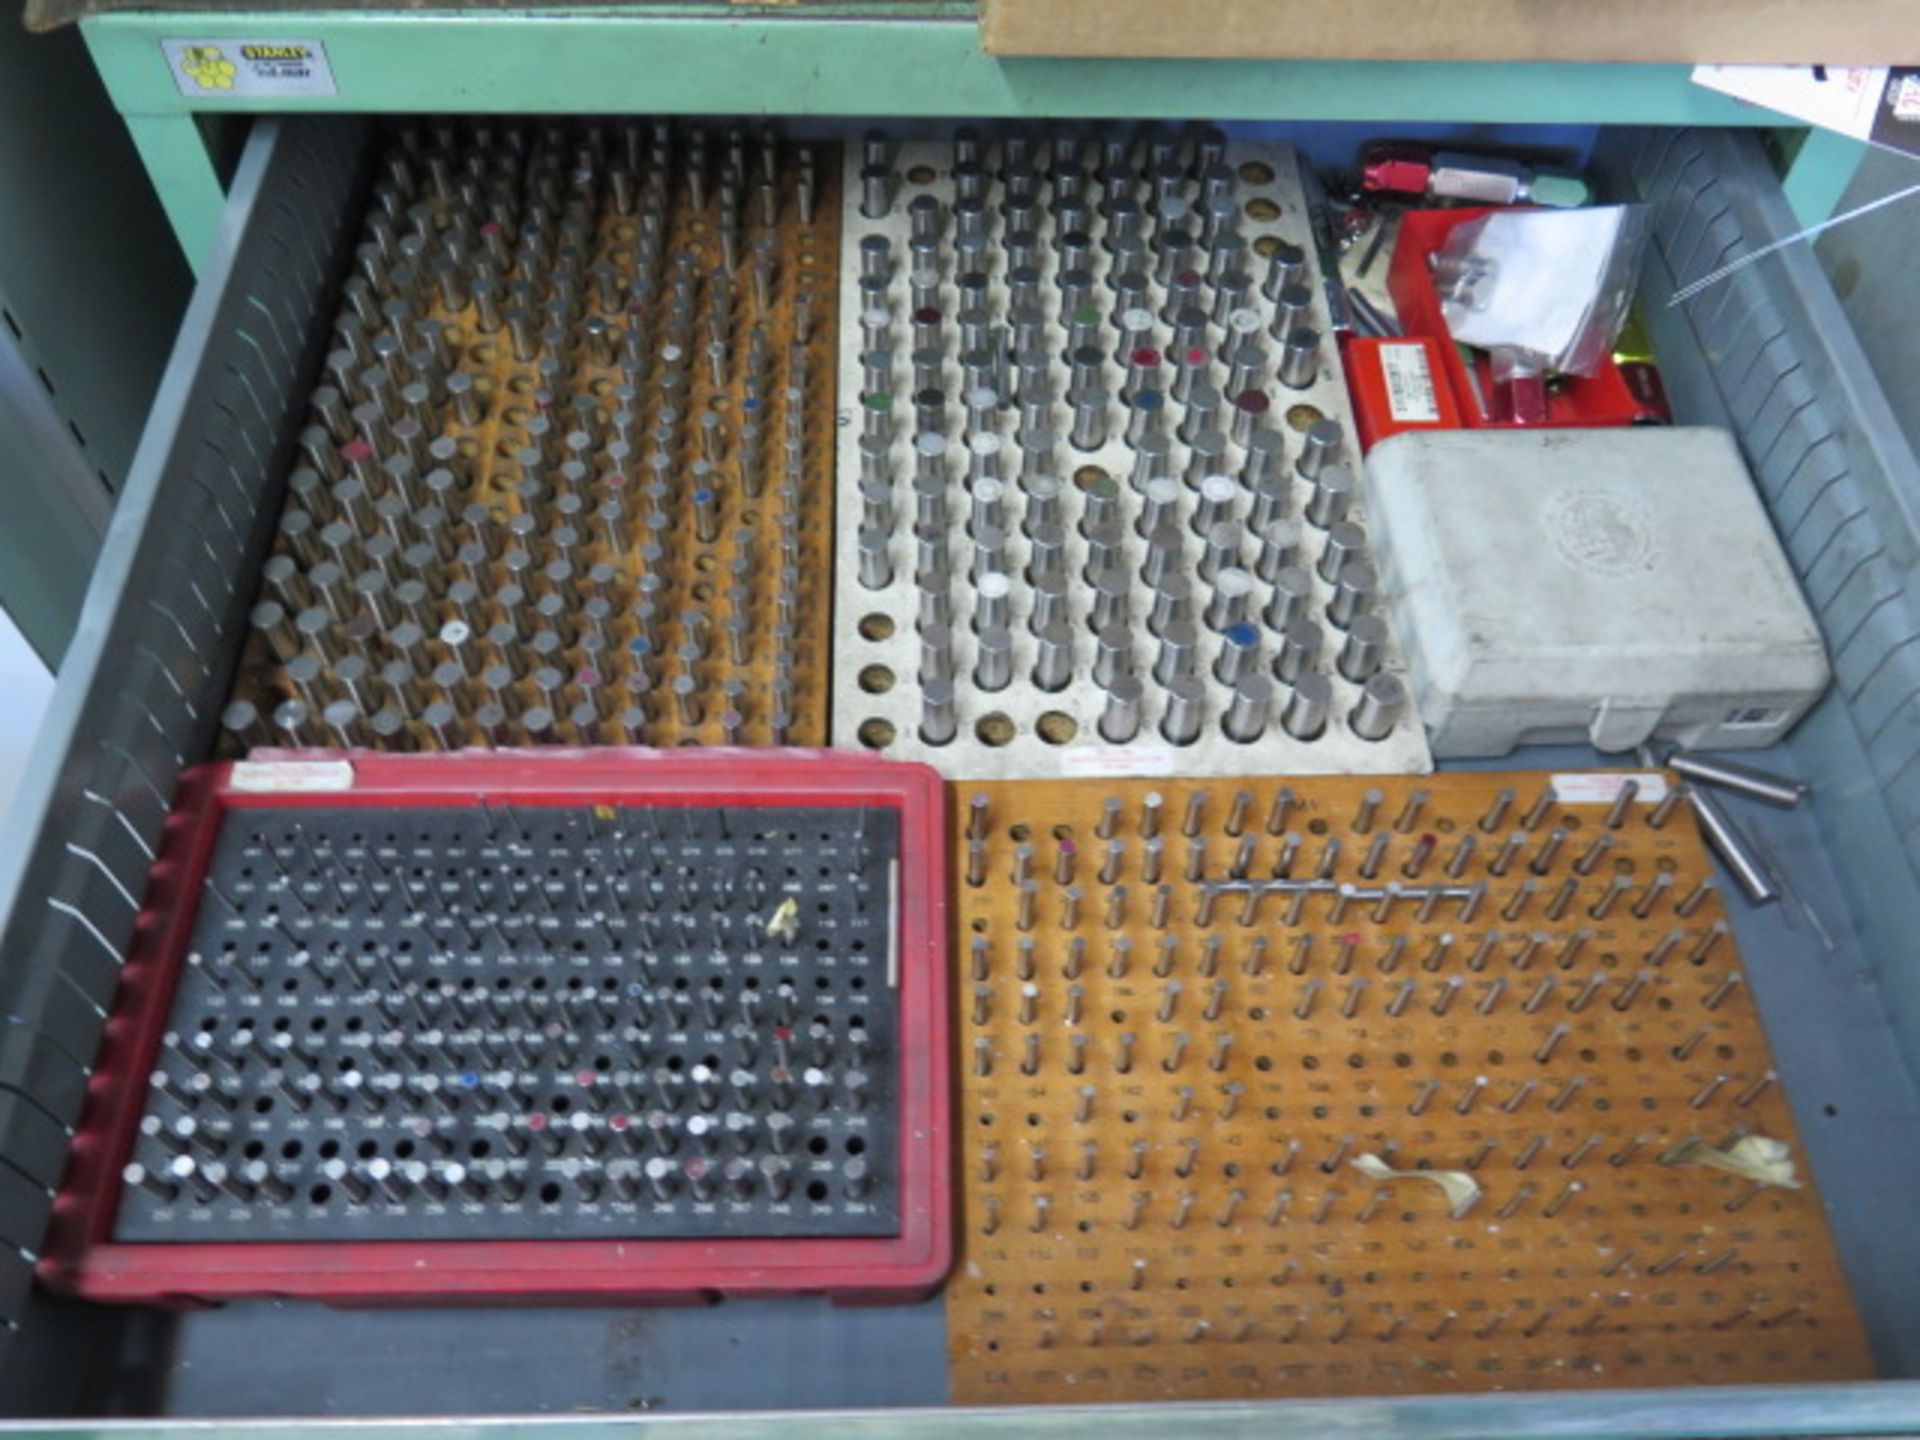 Pin Gage Sets 0.011" to 1.000" (IN CABINET - CABINET NOT INCLUDED) (SOLD AS-IS - NO WARRANTY) - Image 3 of 10